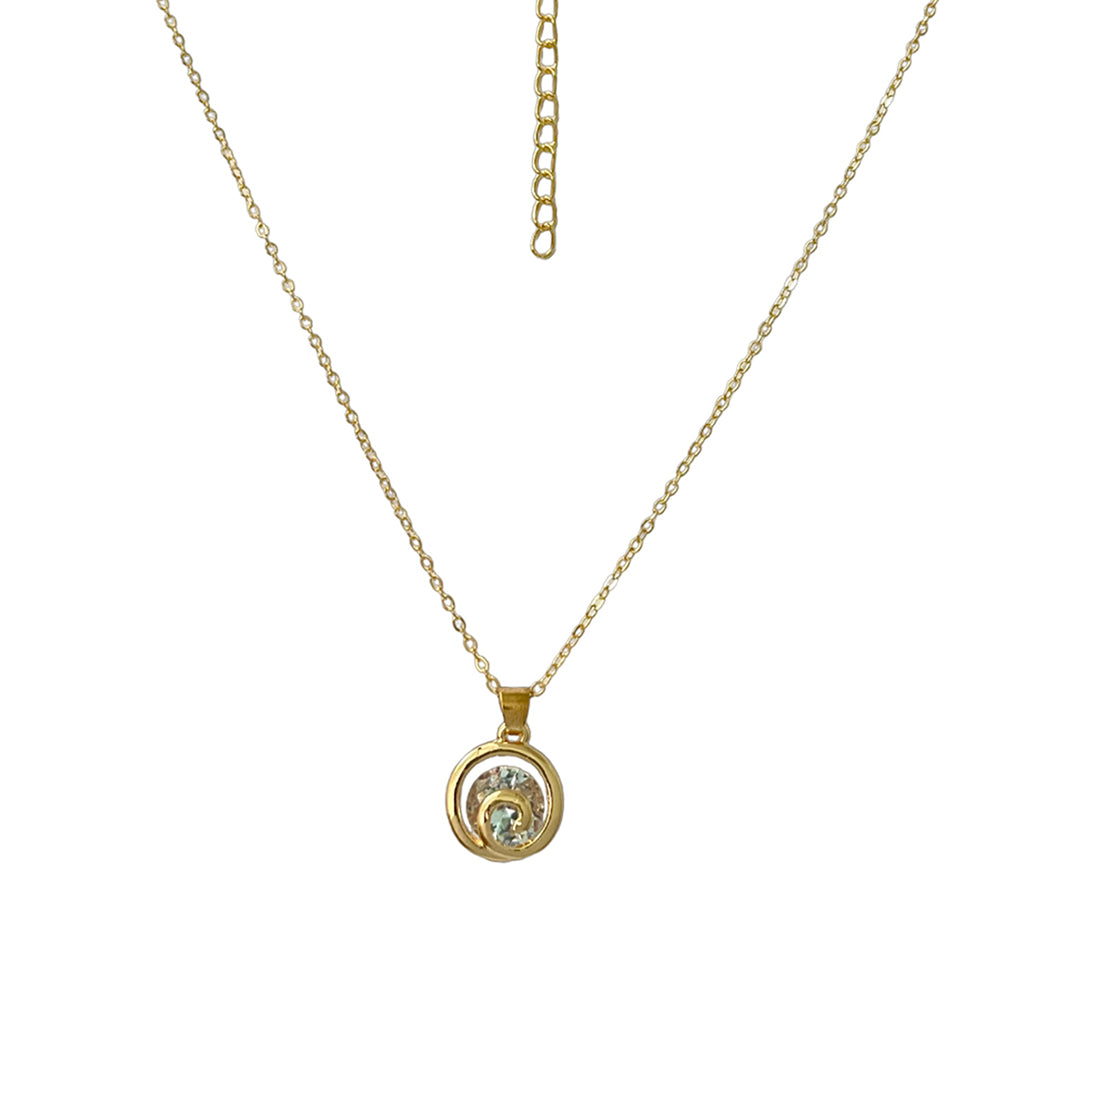 Ayesha Mini Spiral with Diamante Stud Pendant Gold-Toned Necklace